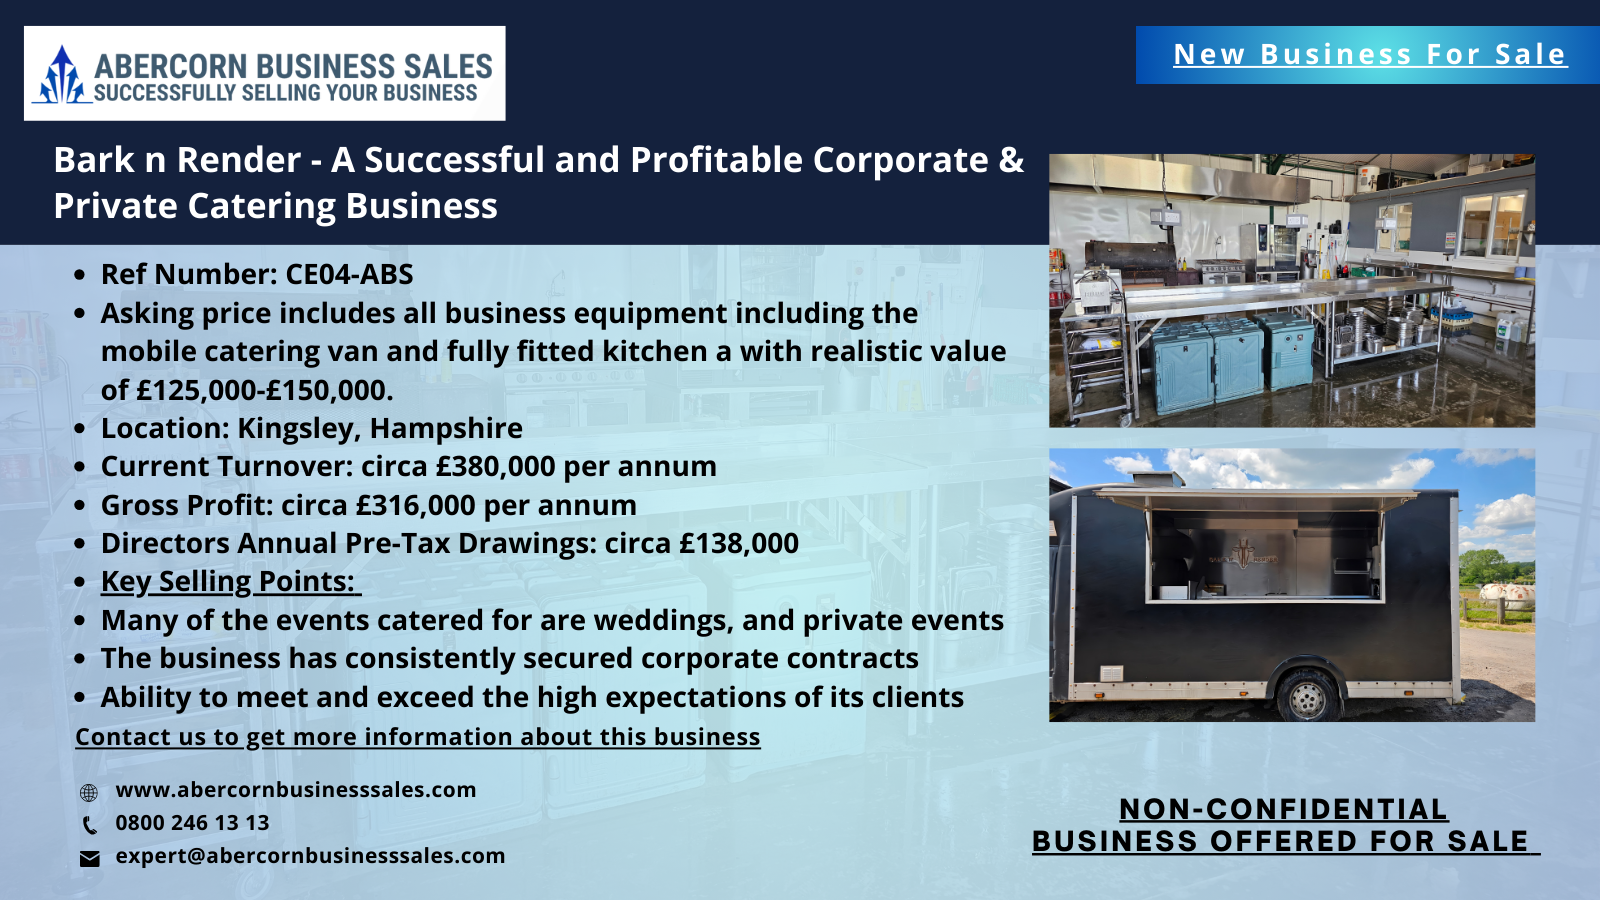 CE04-ABS - Bark n Render - A Successful and Profitable Corporate & Private Catering Business Offered for Sale